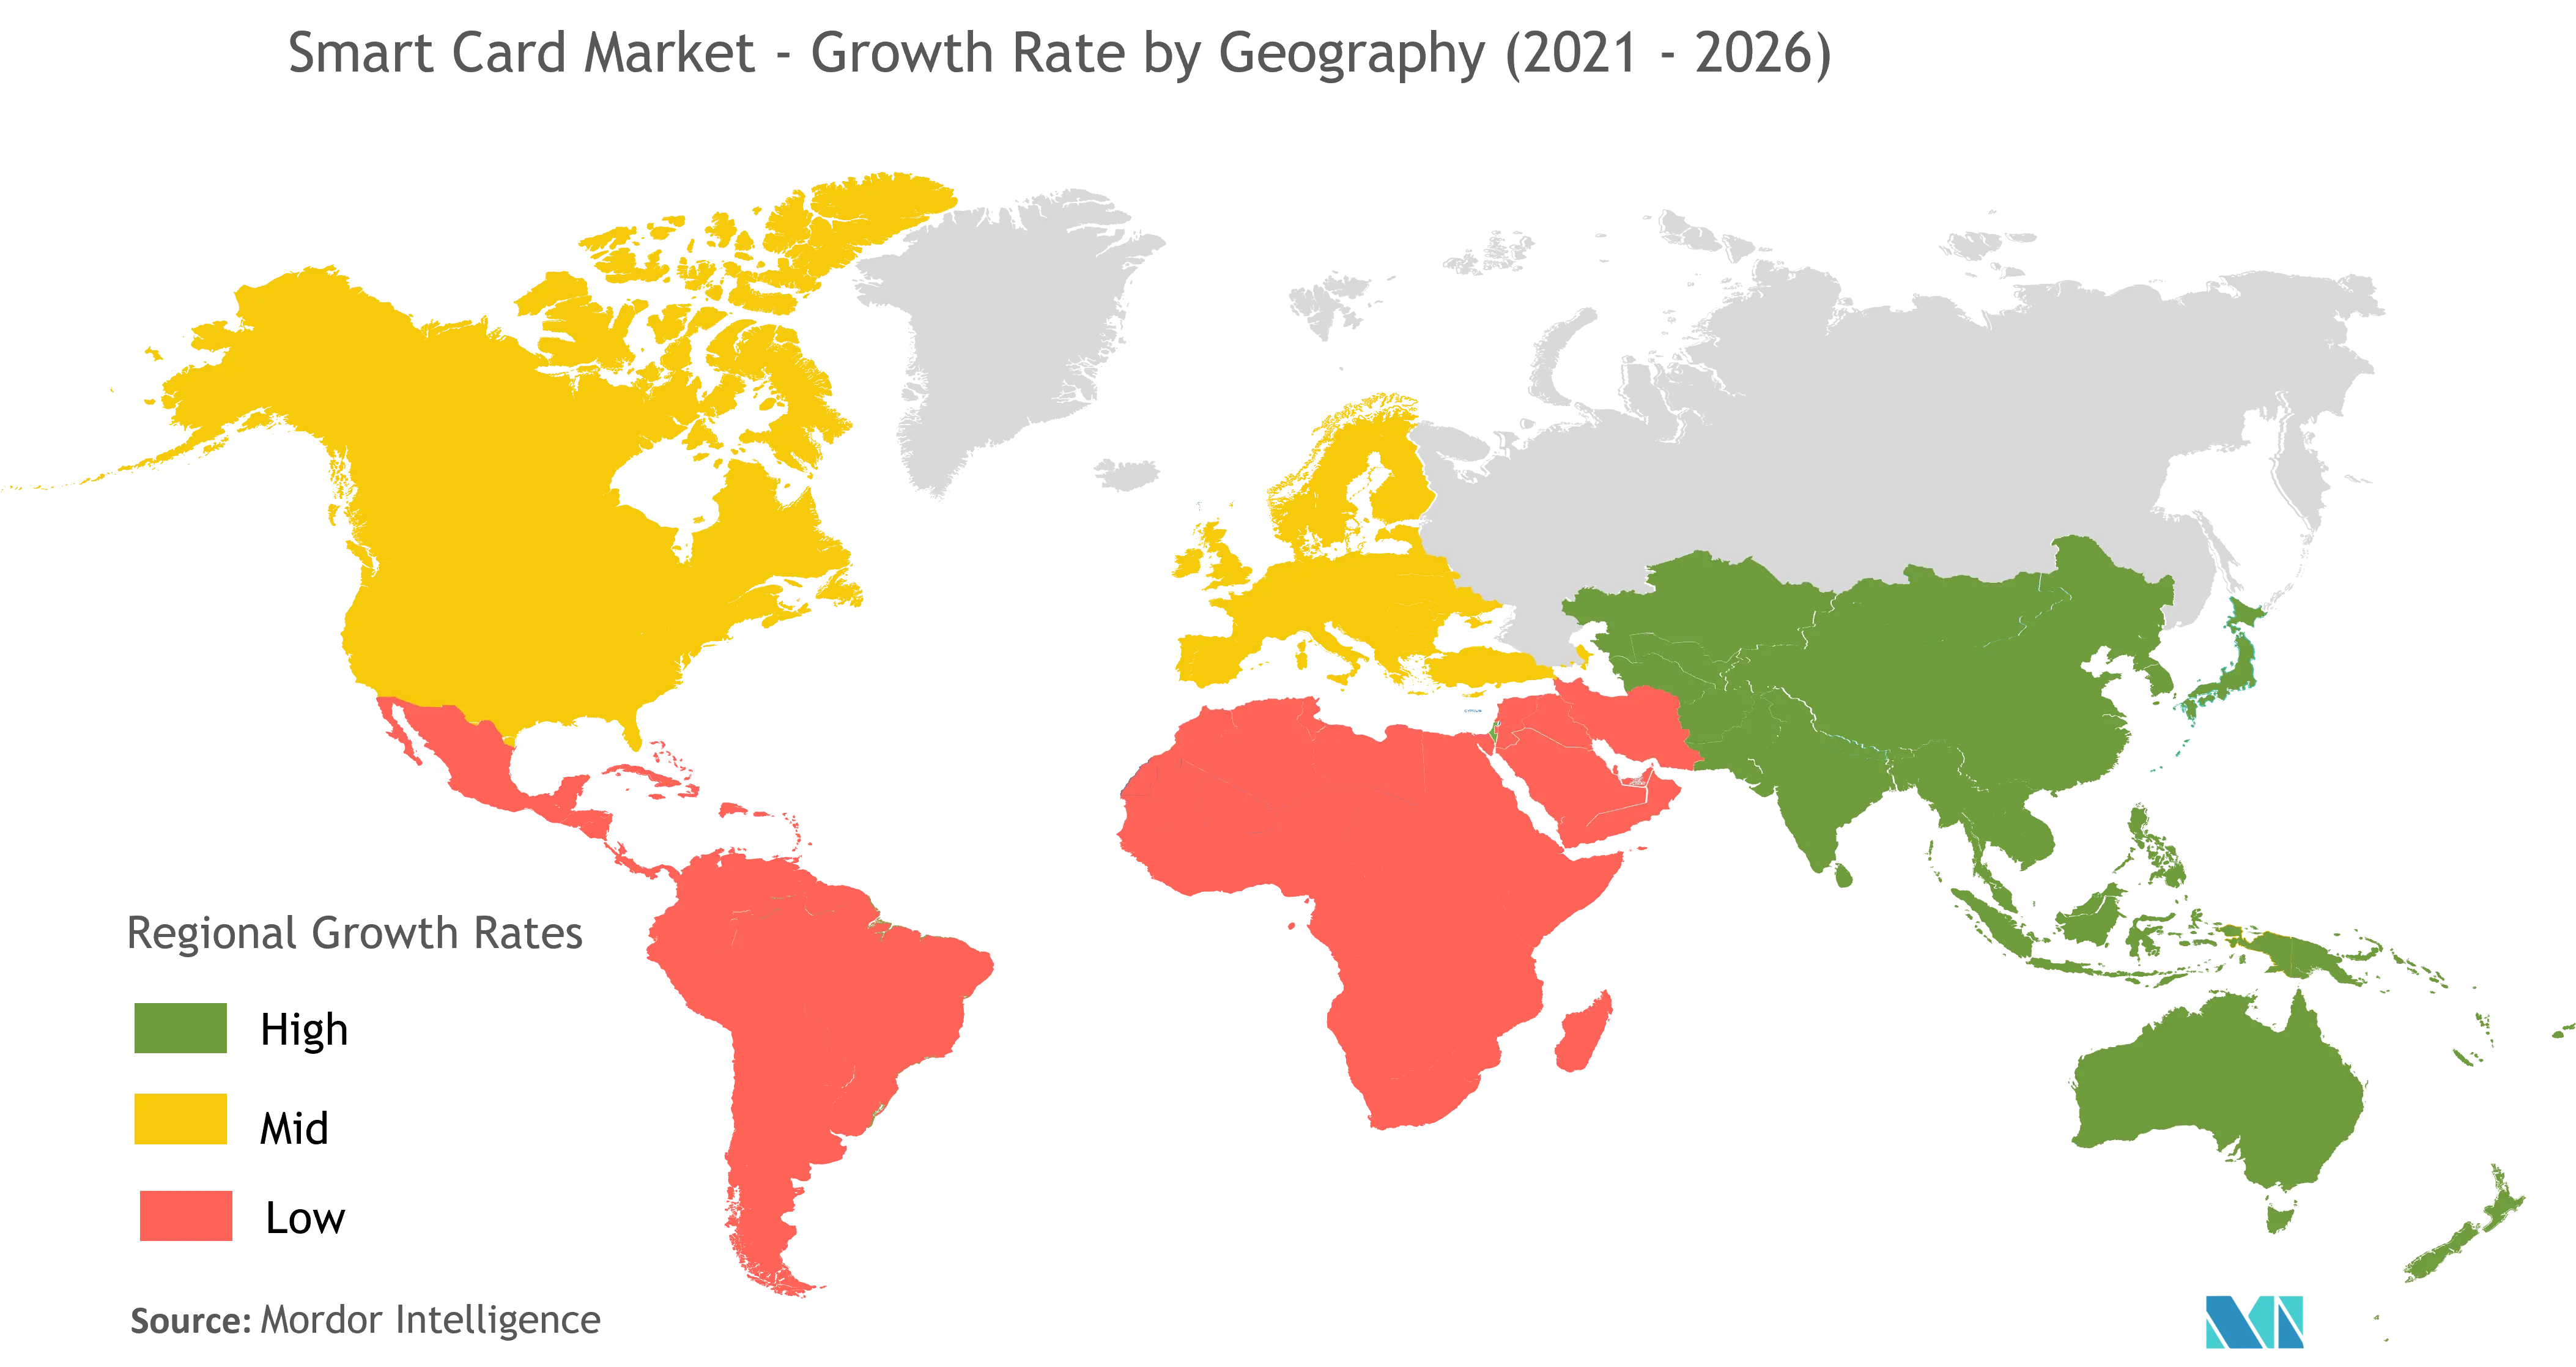 Smart Card Market Growth Rate